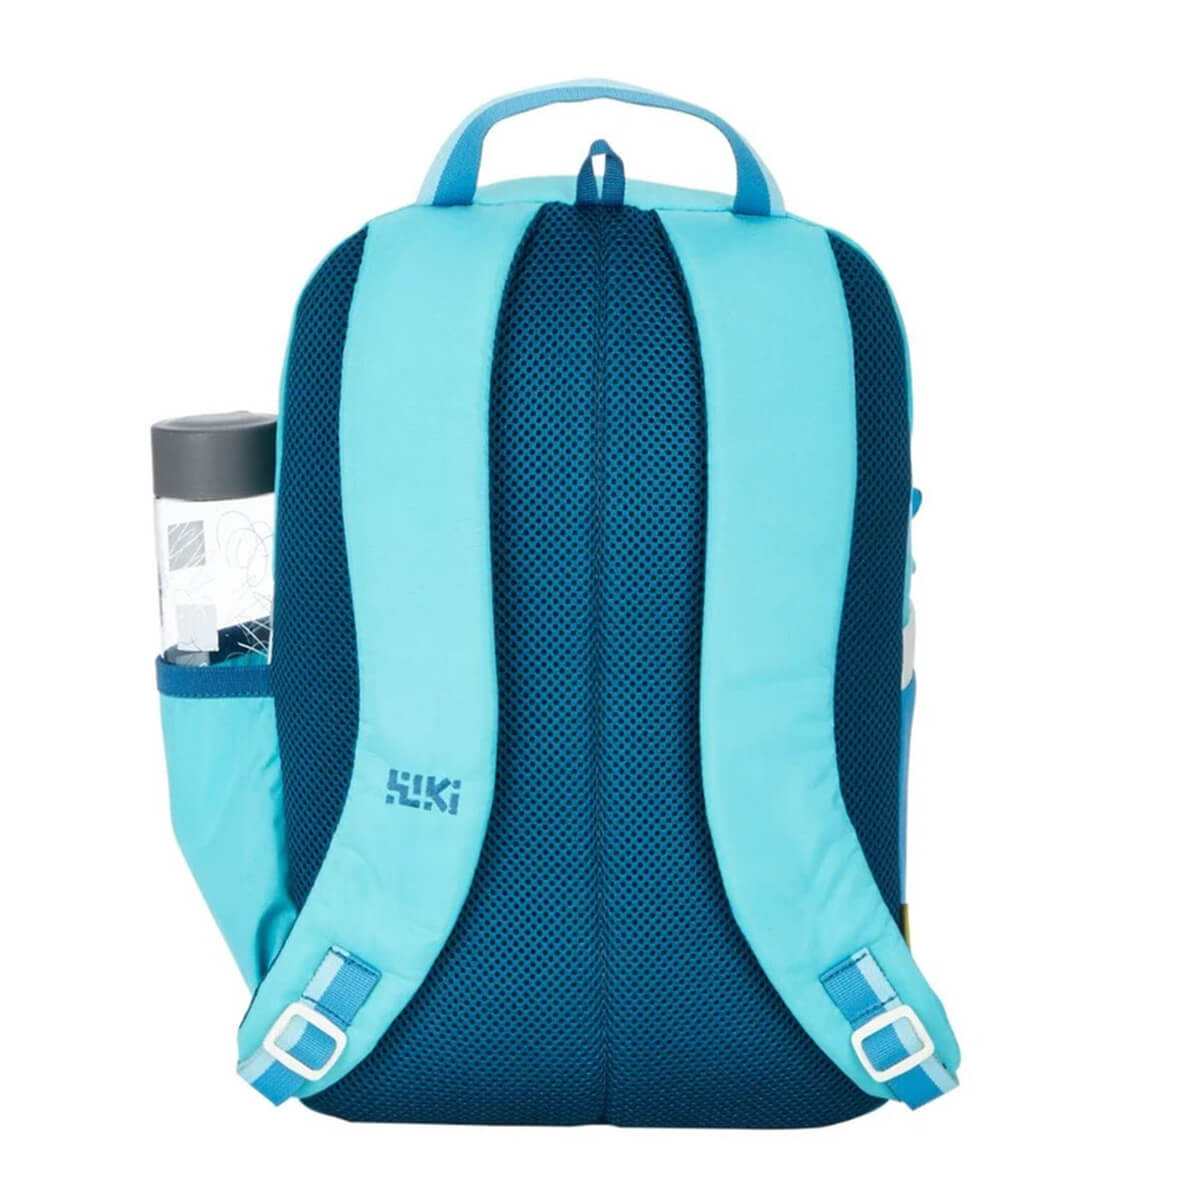 Wildcraft Wiki Champ 1 Plus Whale Backpack - Blue